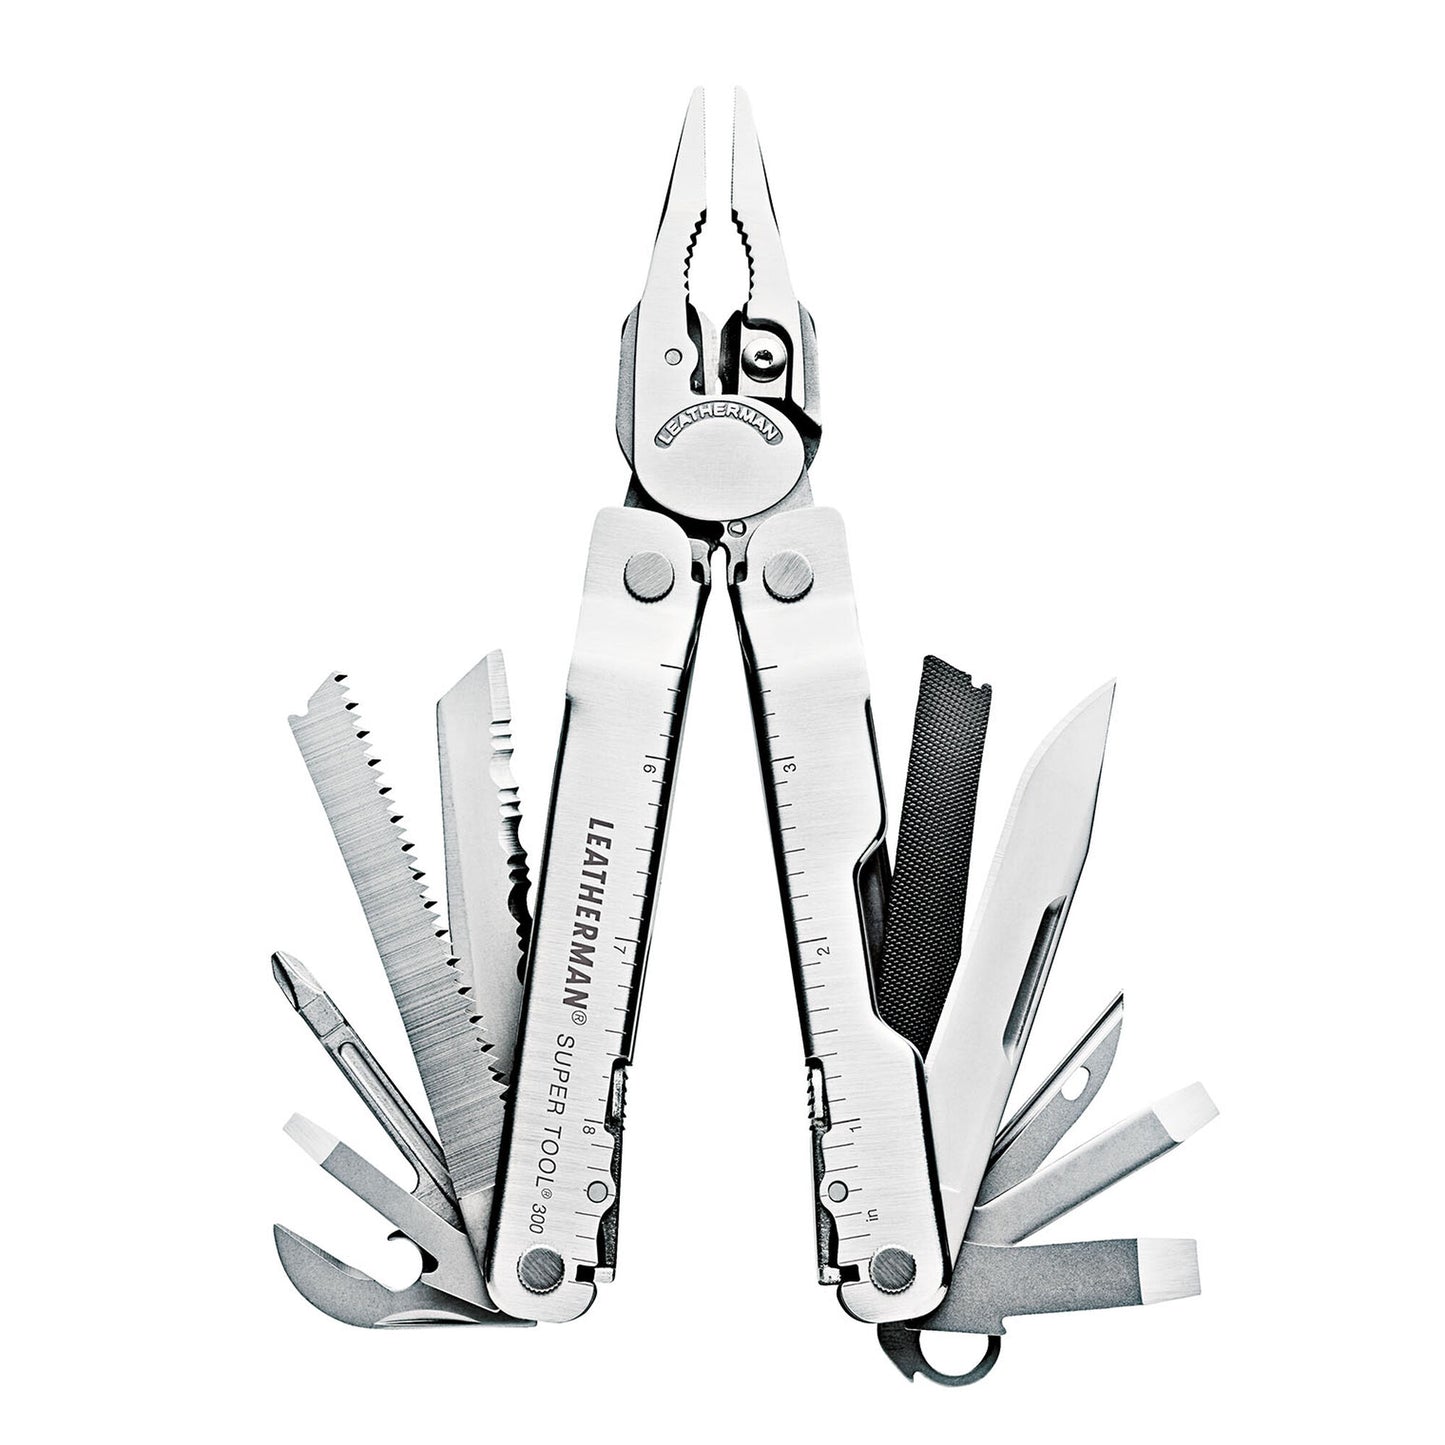 Pince multifonctions Super tool 300 (19 outils) - Leatherman-T.A DEFENSE